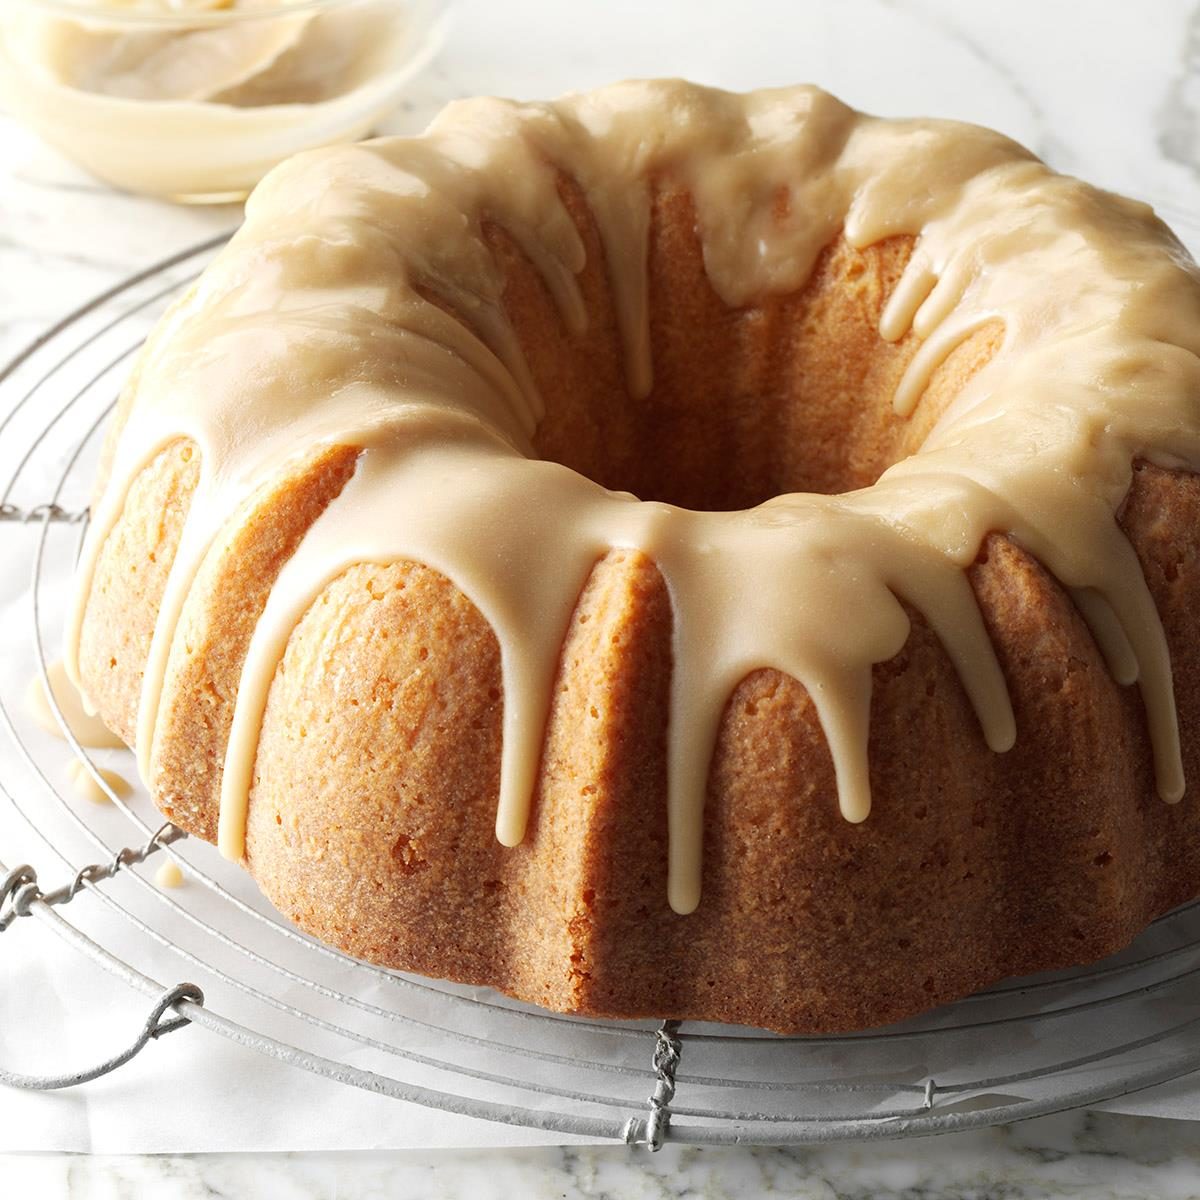 Buttermilk Cake With Caramel Icing Exps Cwfm17 38027 C10 11 2b 12